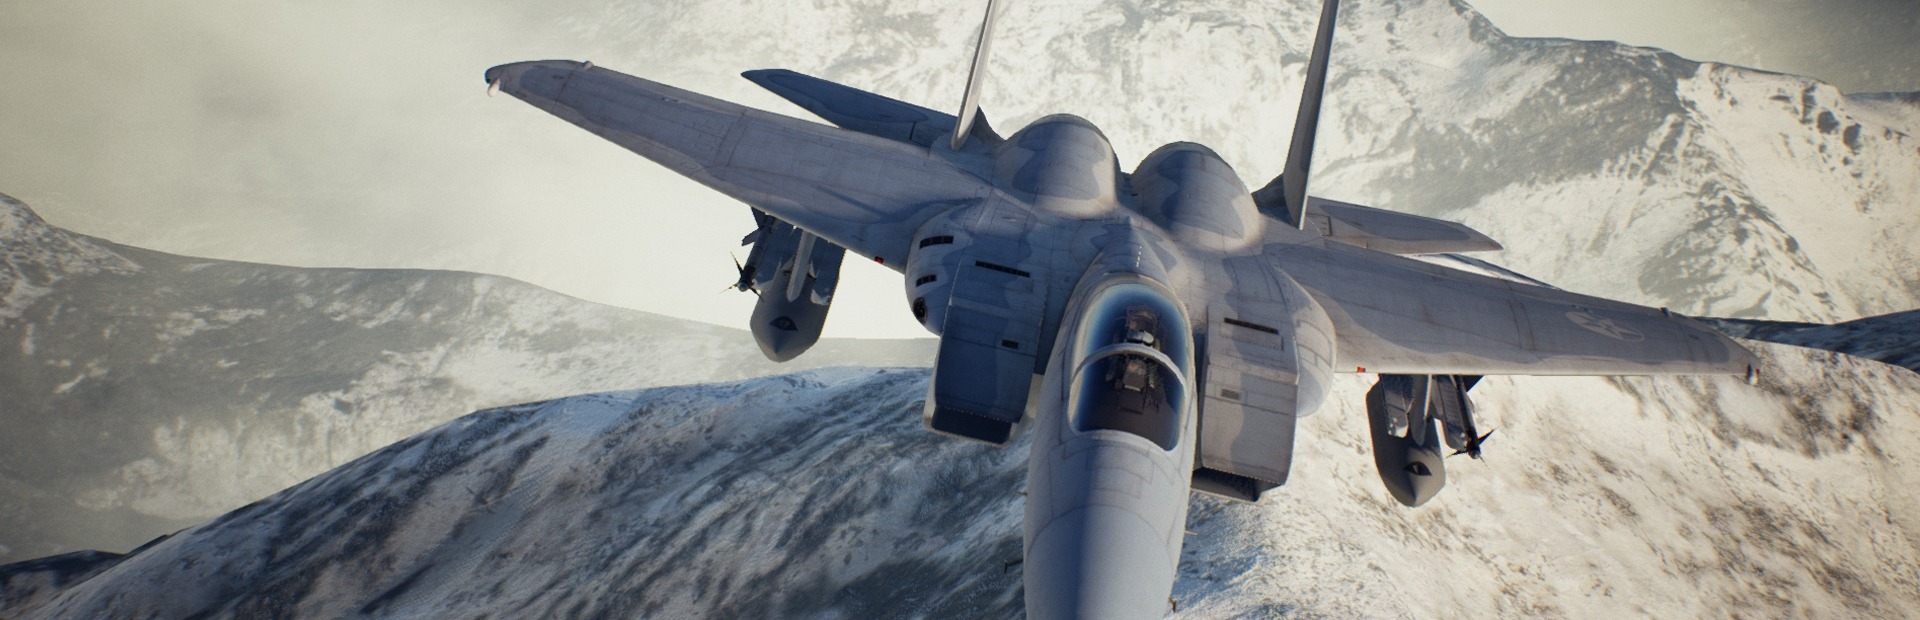 Ace Combat 7: Skies Unknown Season Pass PS4